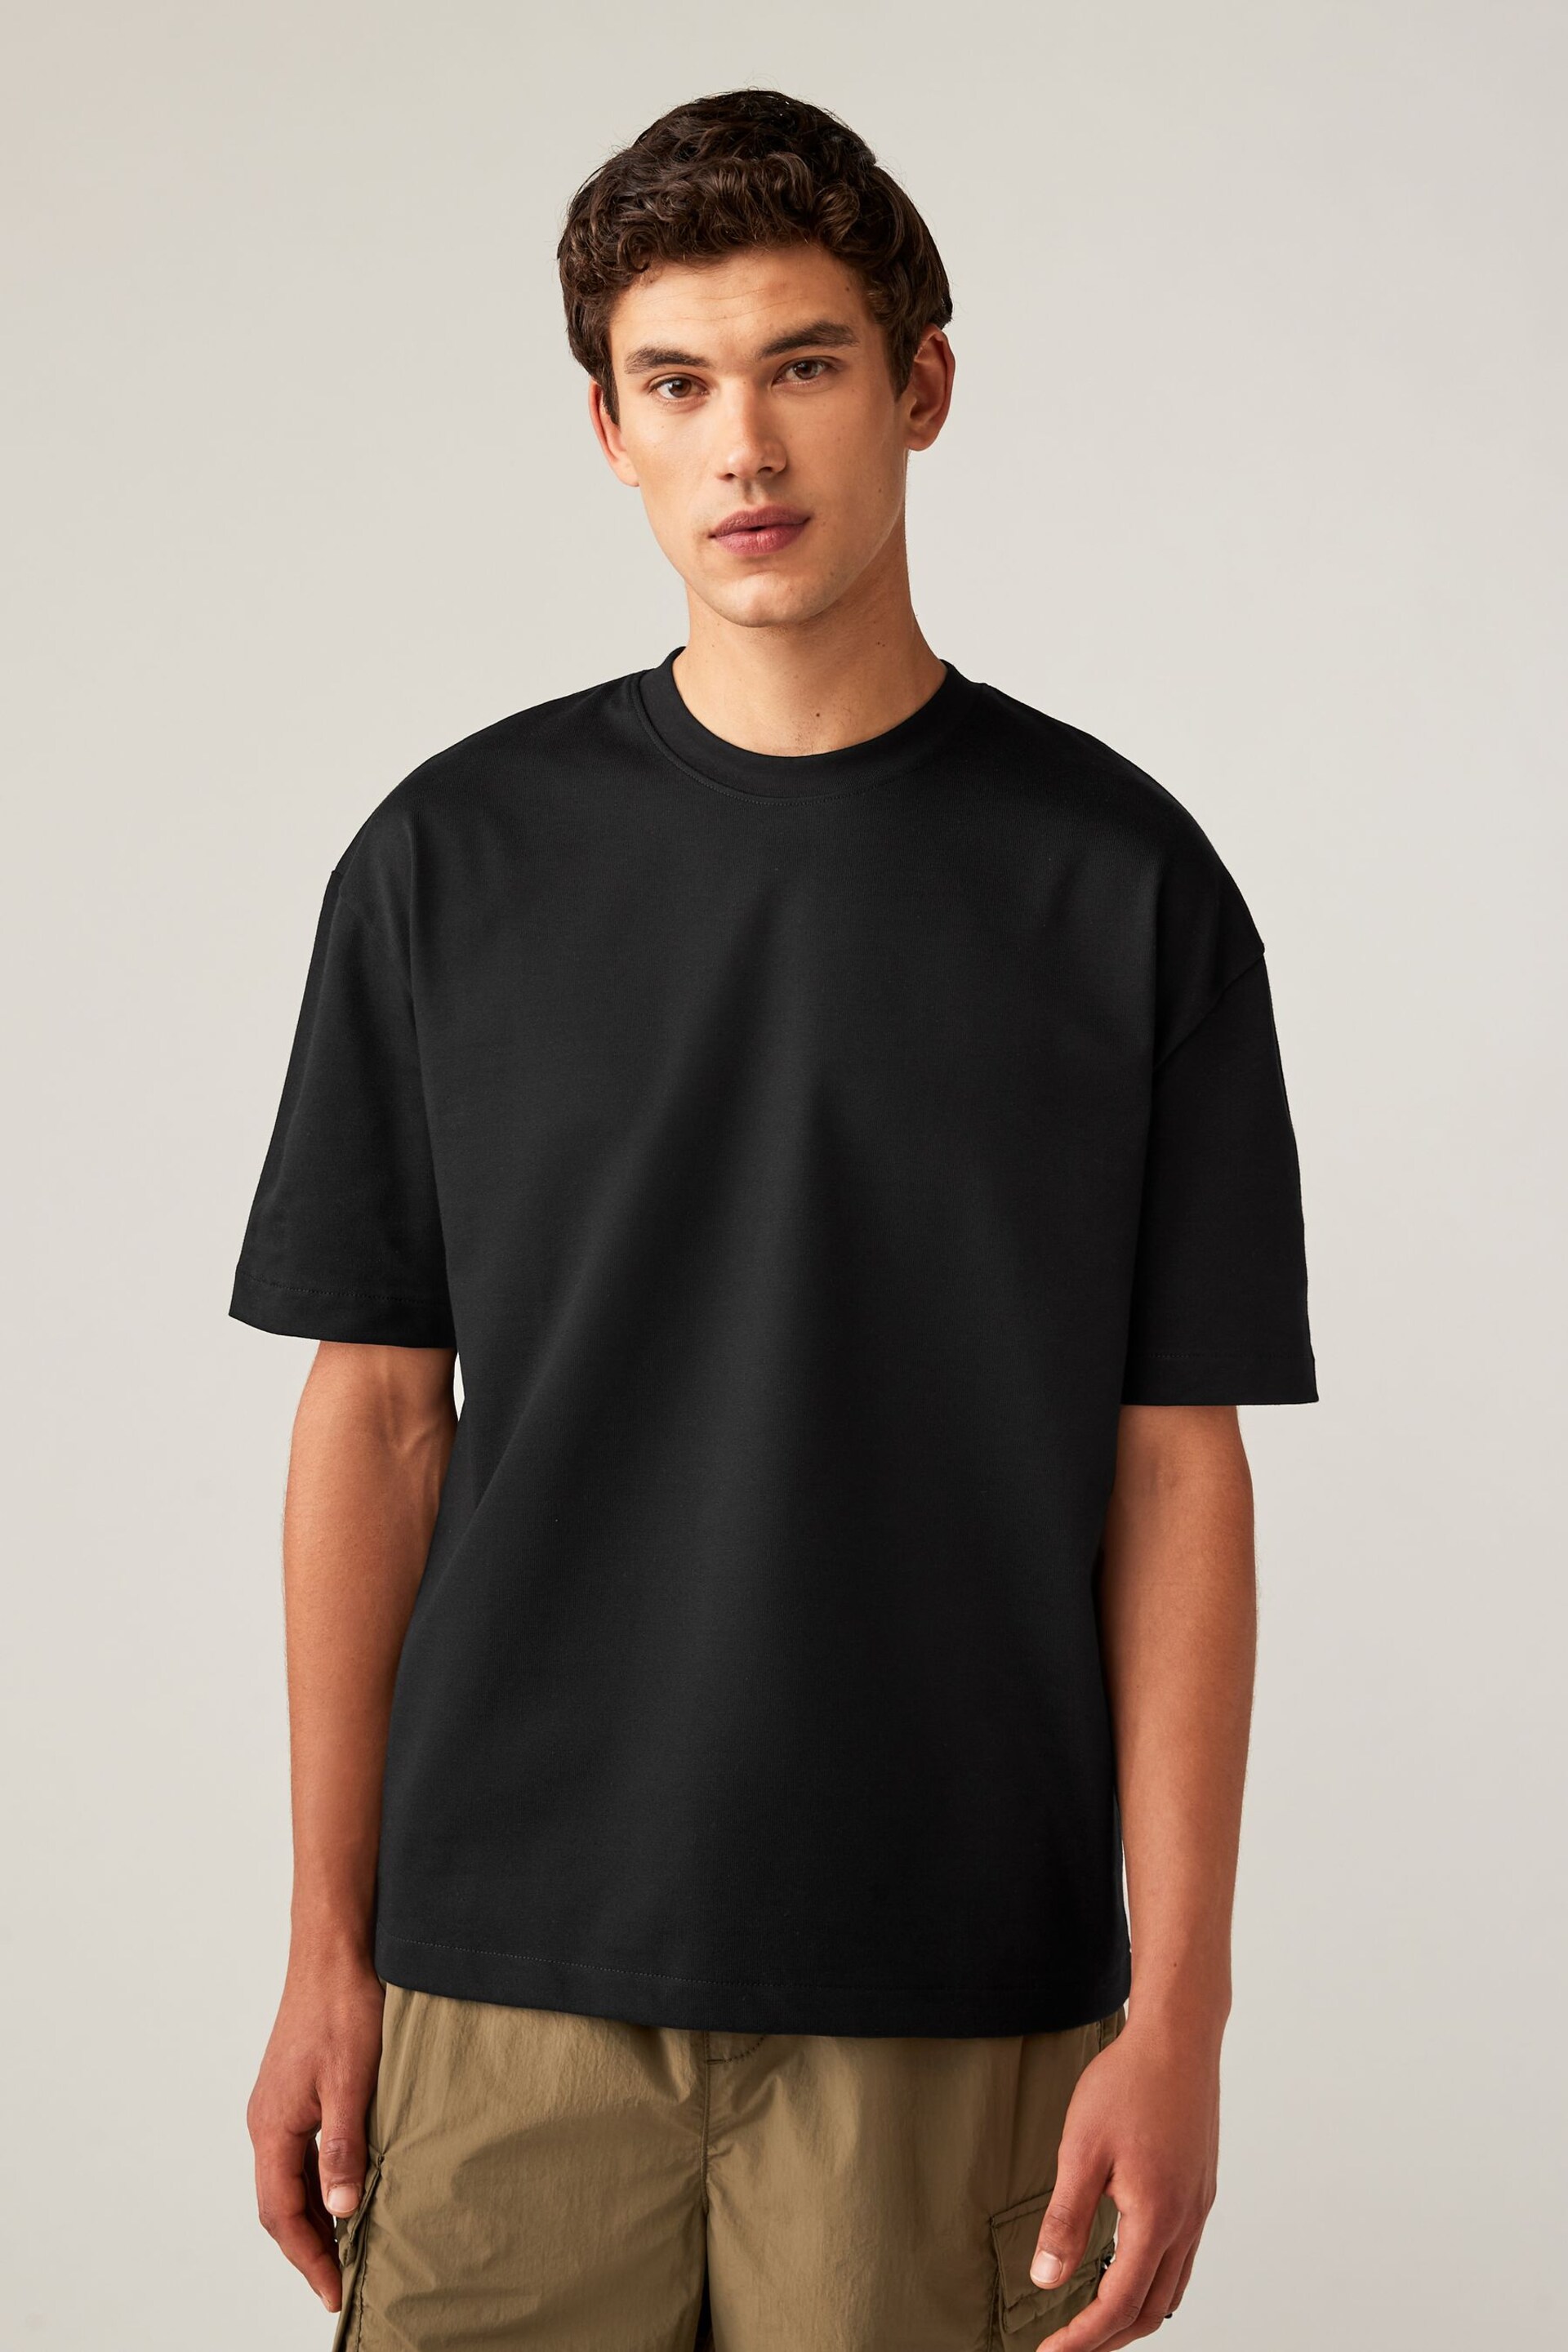 Black Relaxed Fit Heavy weight T-Shirts 3 Pack - Image 2 of 10